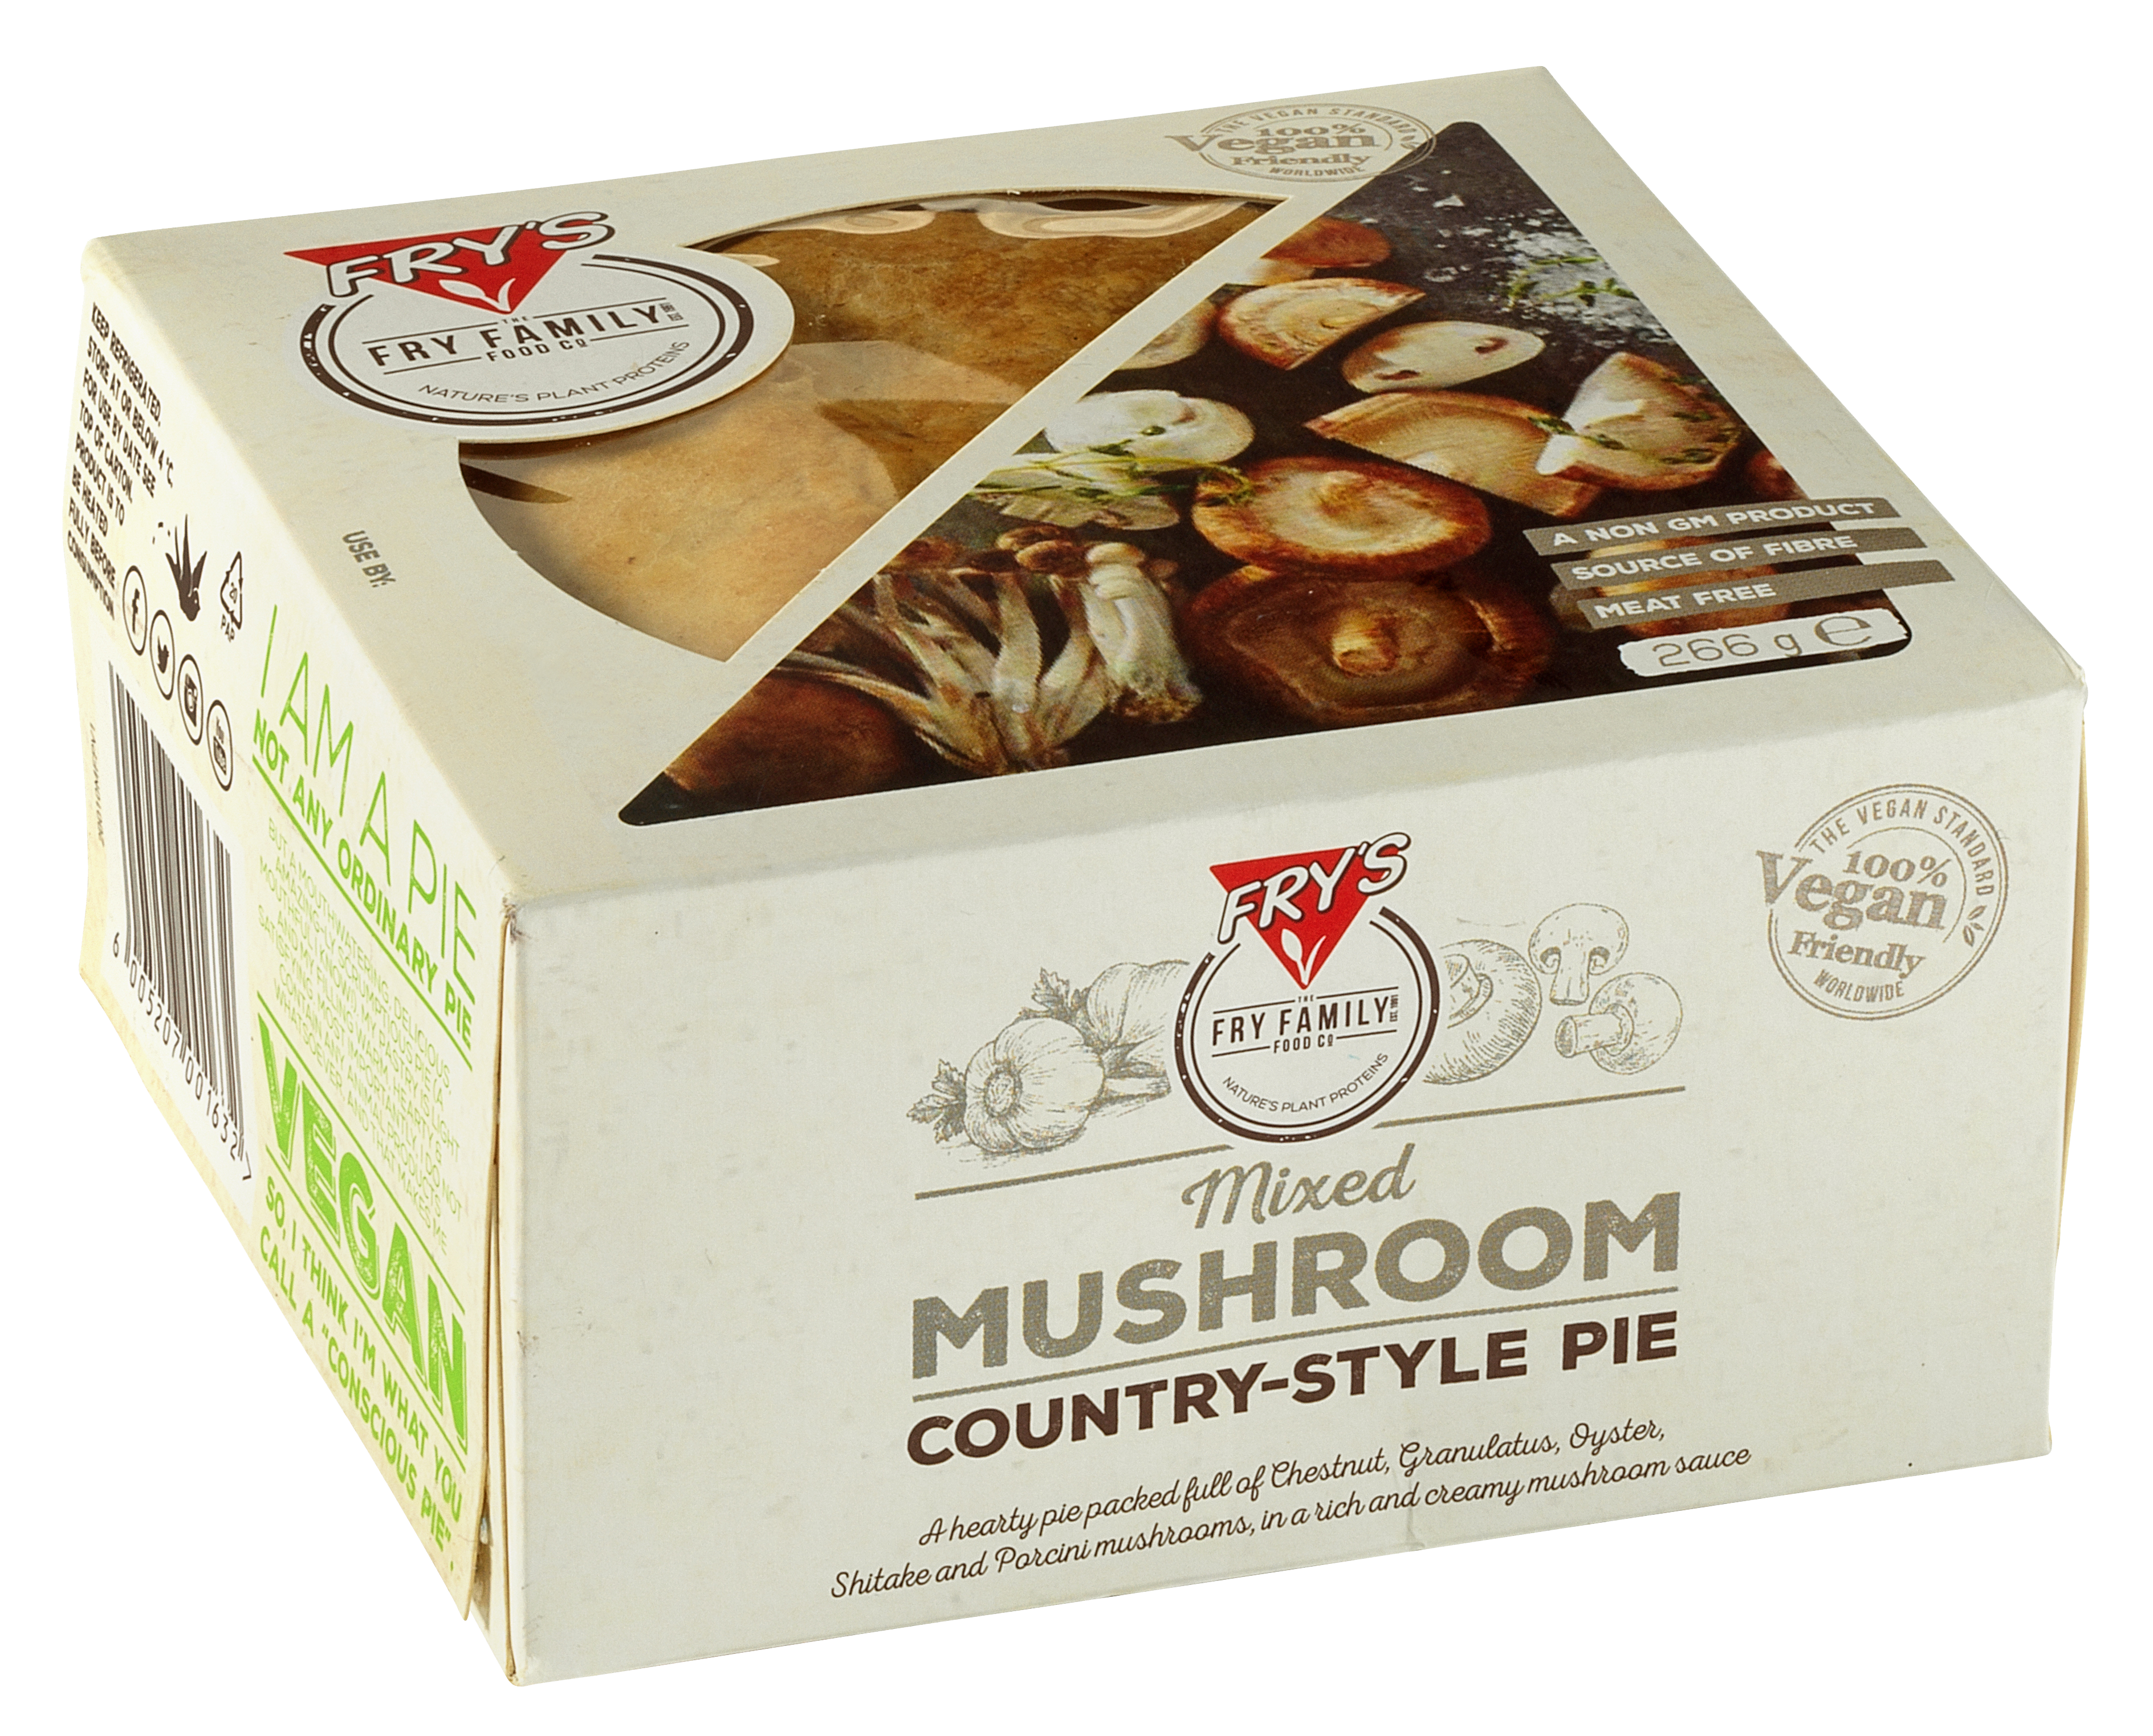 Mixed mushroom country-style pie in box